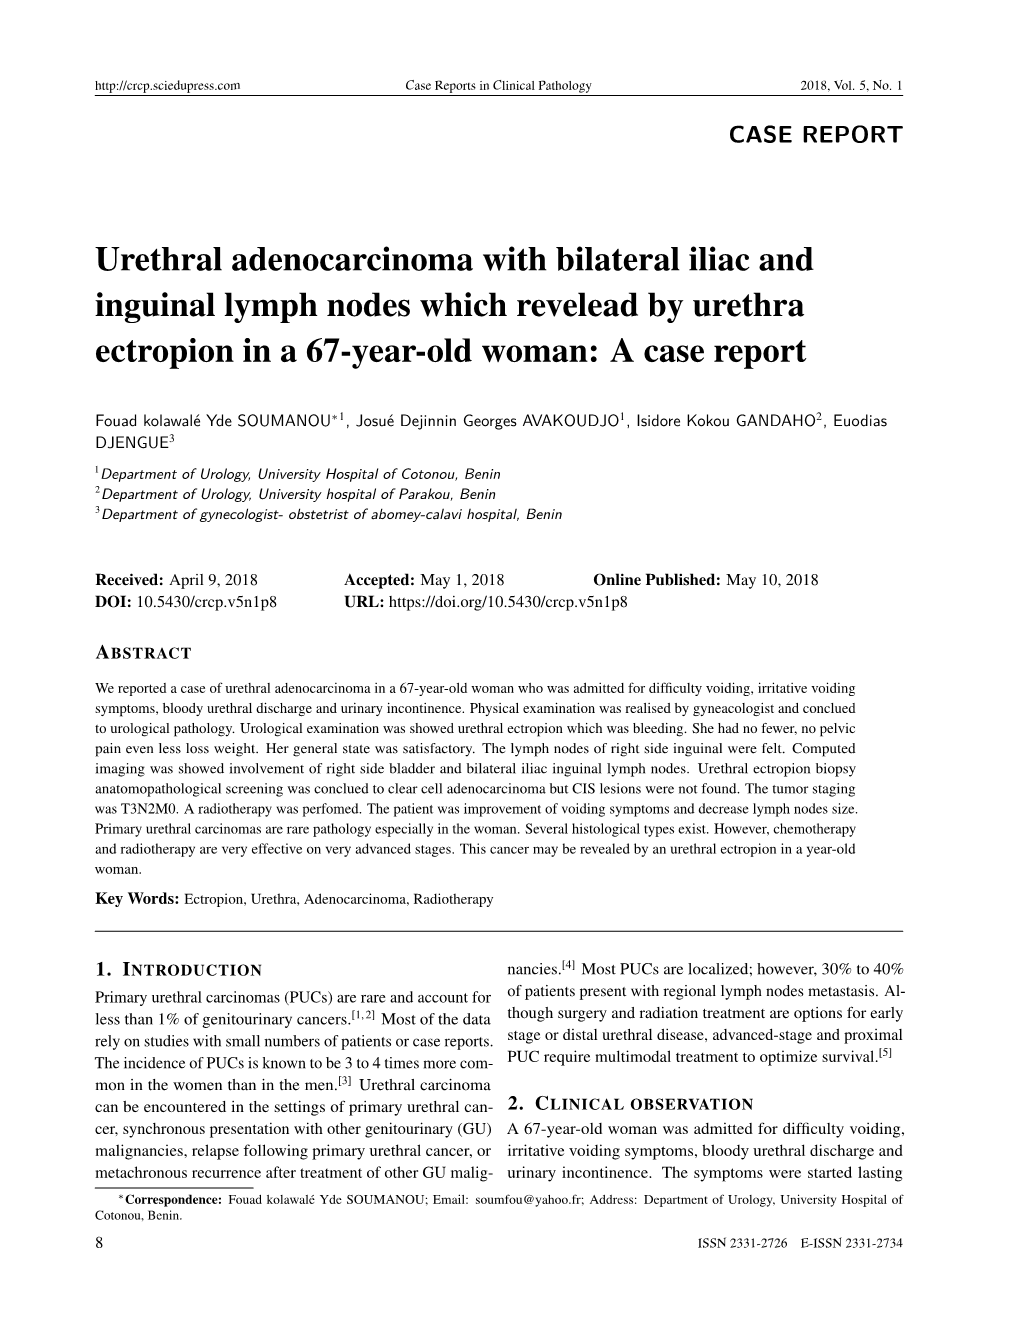 Urethral Adenocarcinoma with Bilateral Iliac and Inguinal Lymph Nodes Which Revelead by Urethra Ectropion in a 67-Year-Old Woman: a Case Report